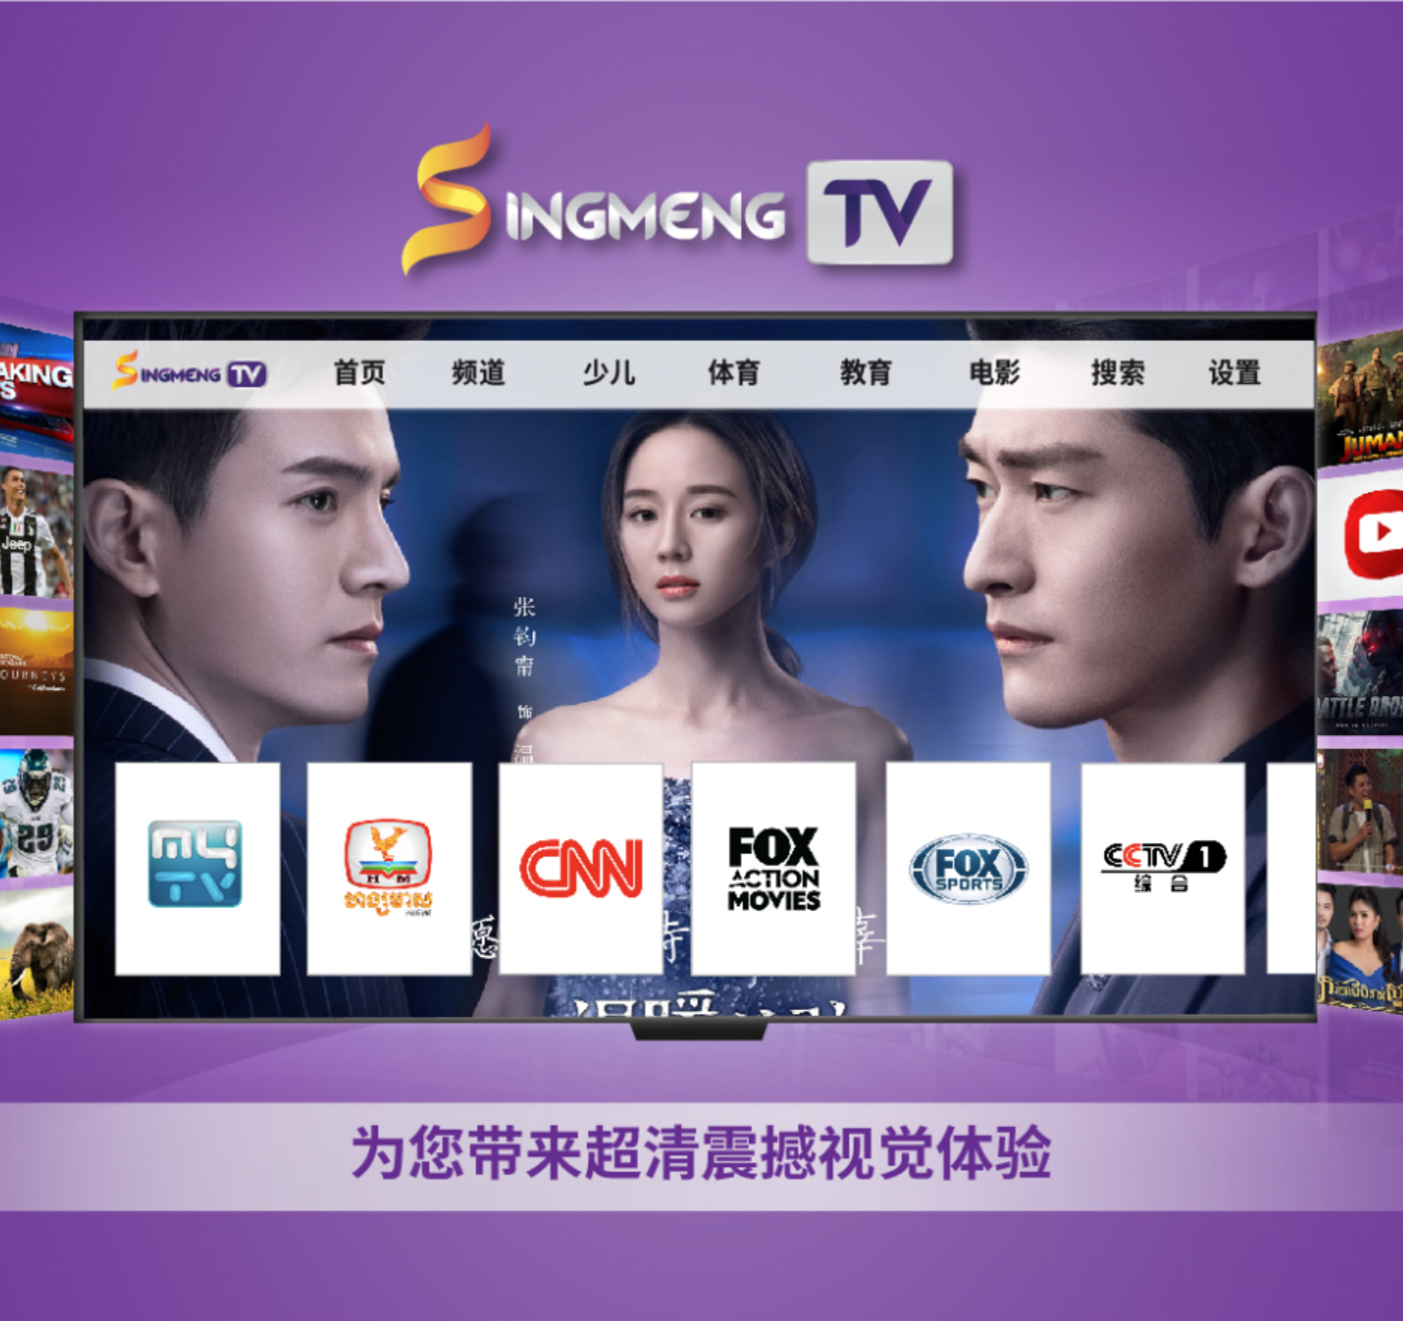 SingMeng TV offers premium service to homes, hotels and condos of Cambodia